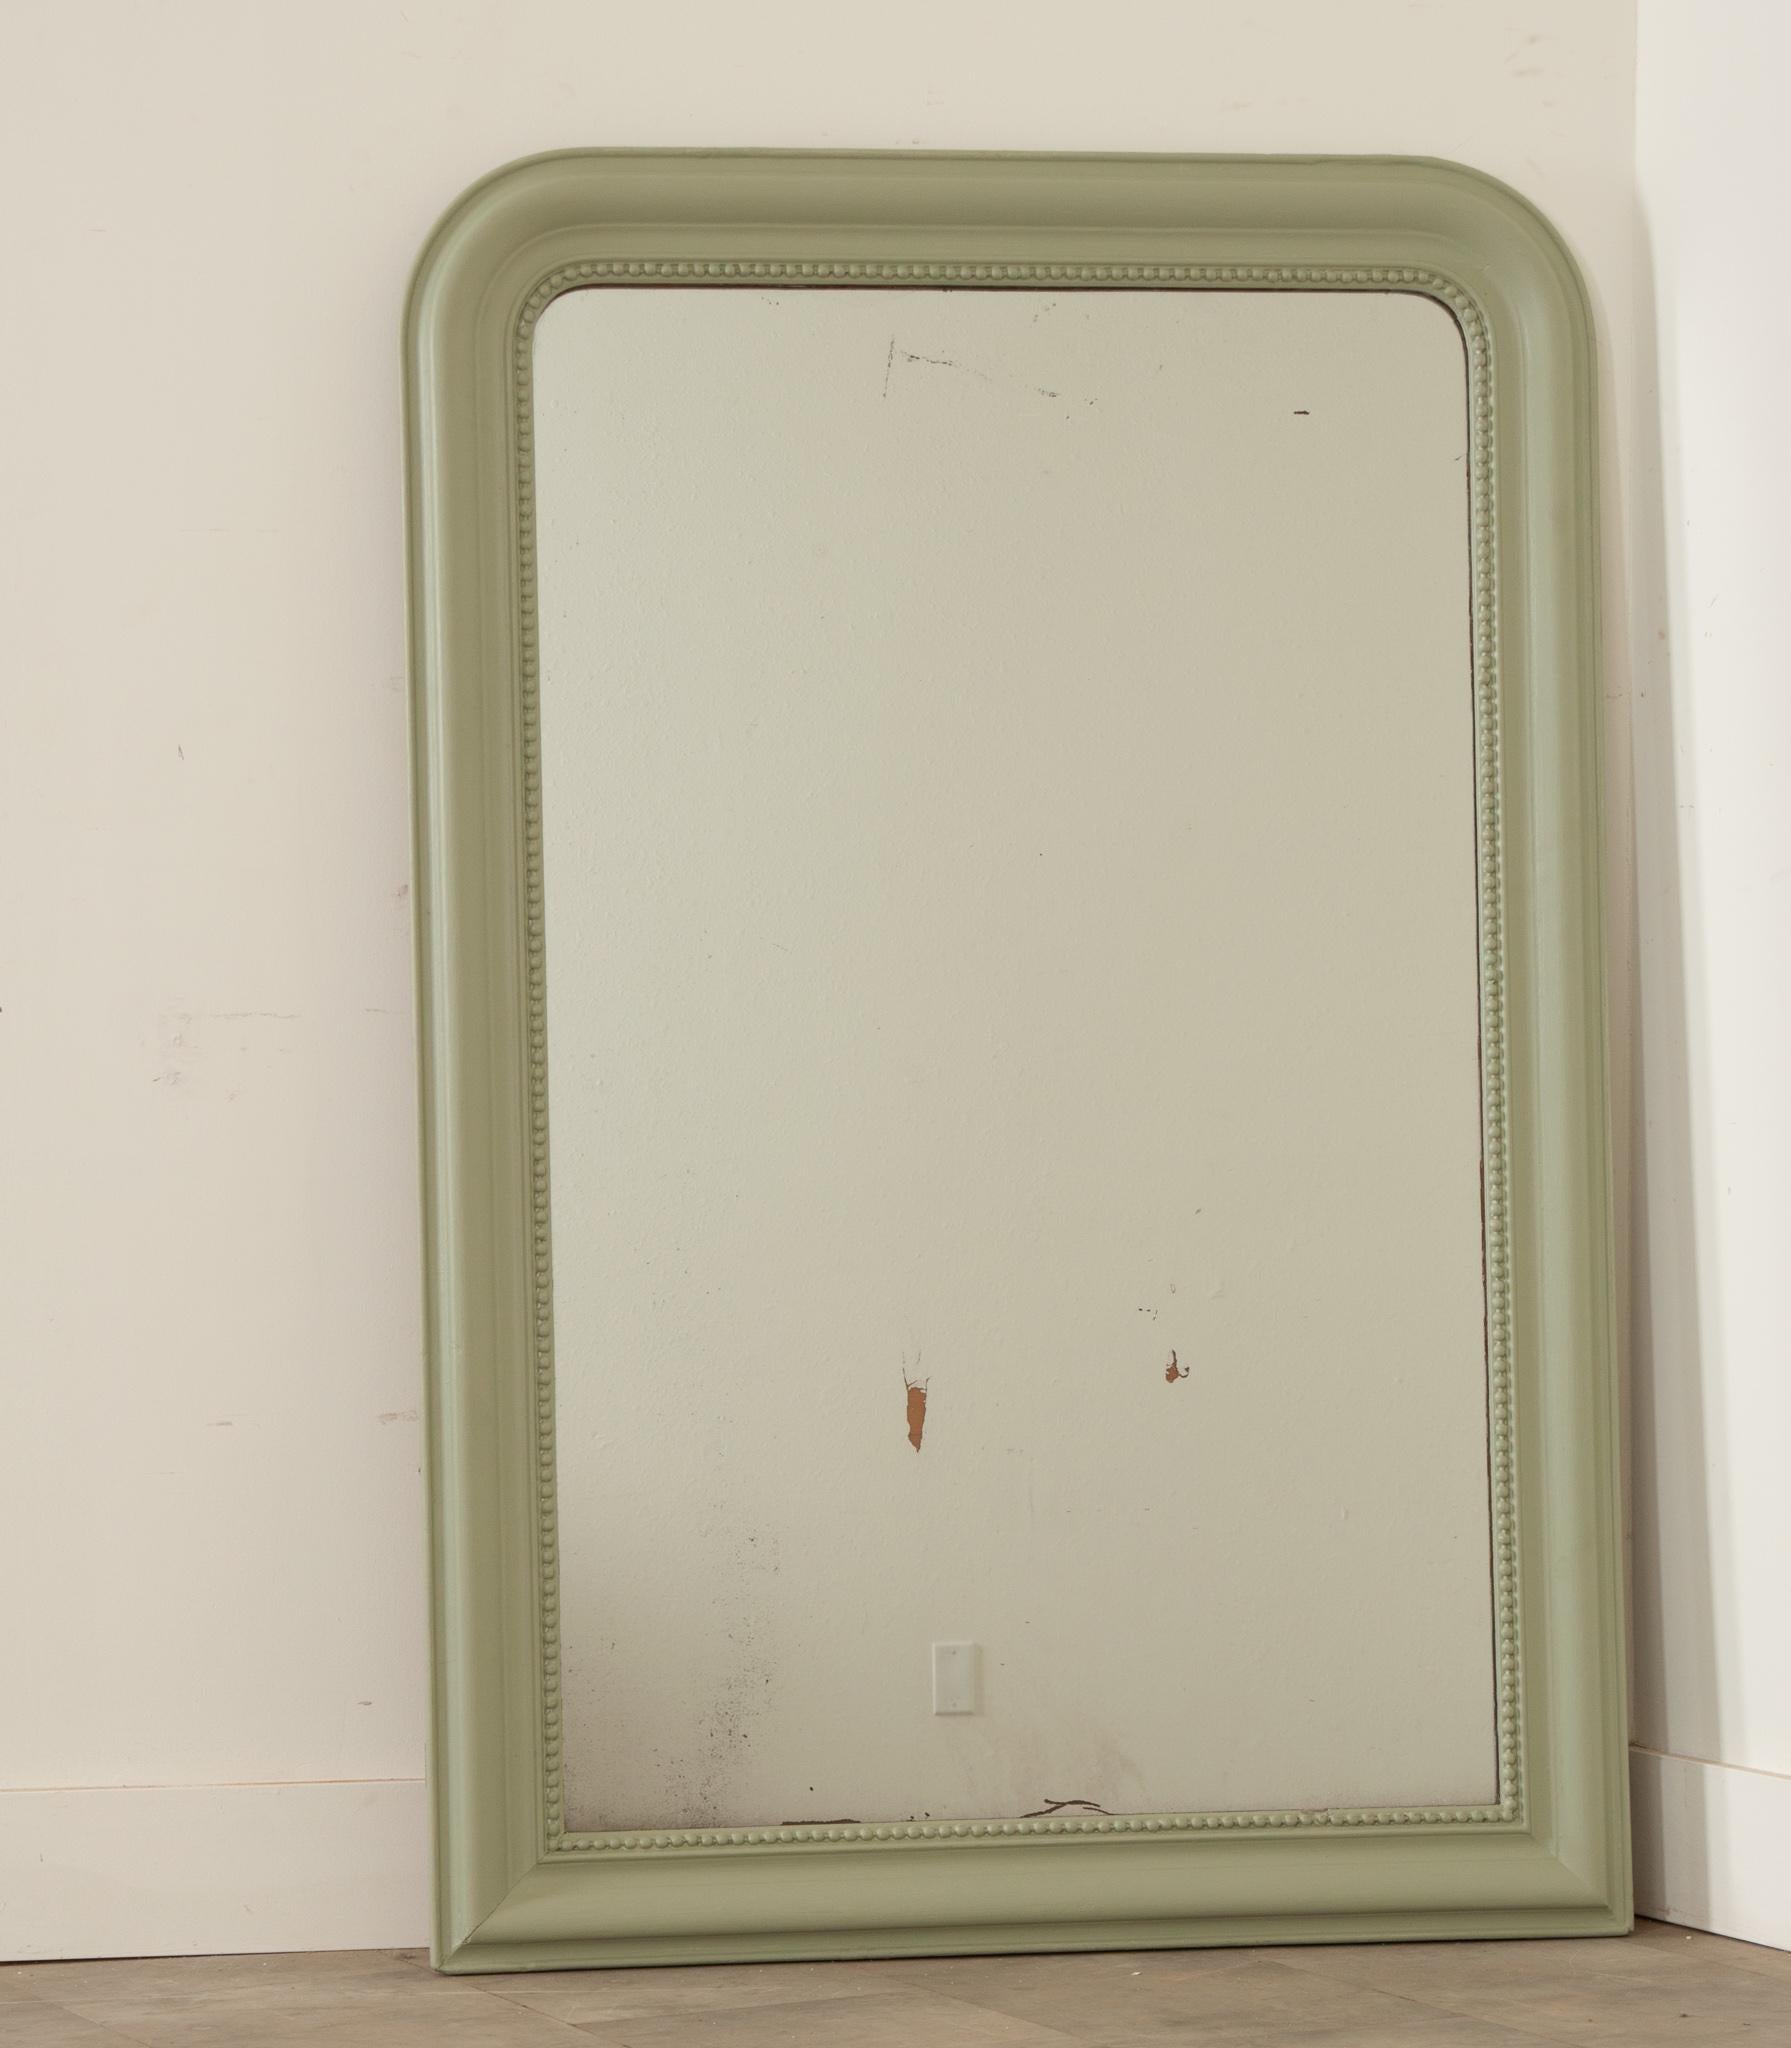 This classically designed Louis Philippe mirror has been recently painted with Farrow & Ball to give it a new life. It retains its original mercury mirror plate and features some authentic degradation while still providing a clear reflection. Make